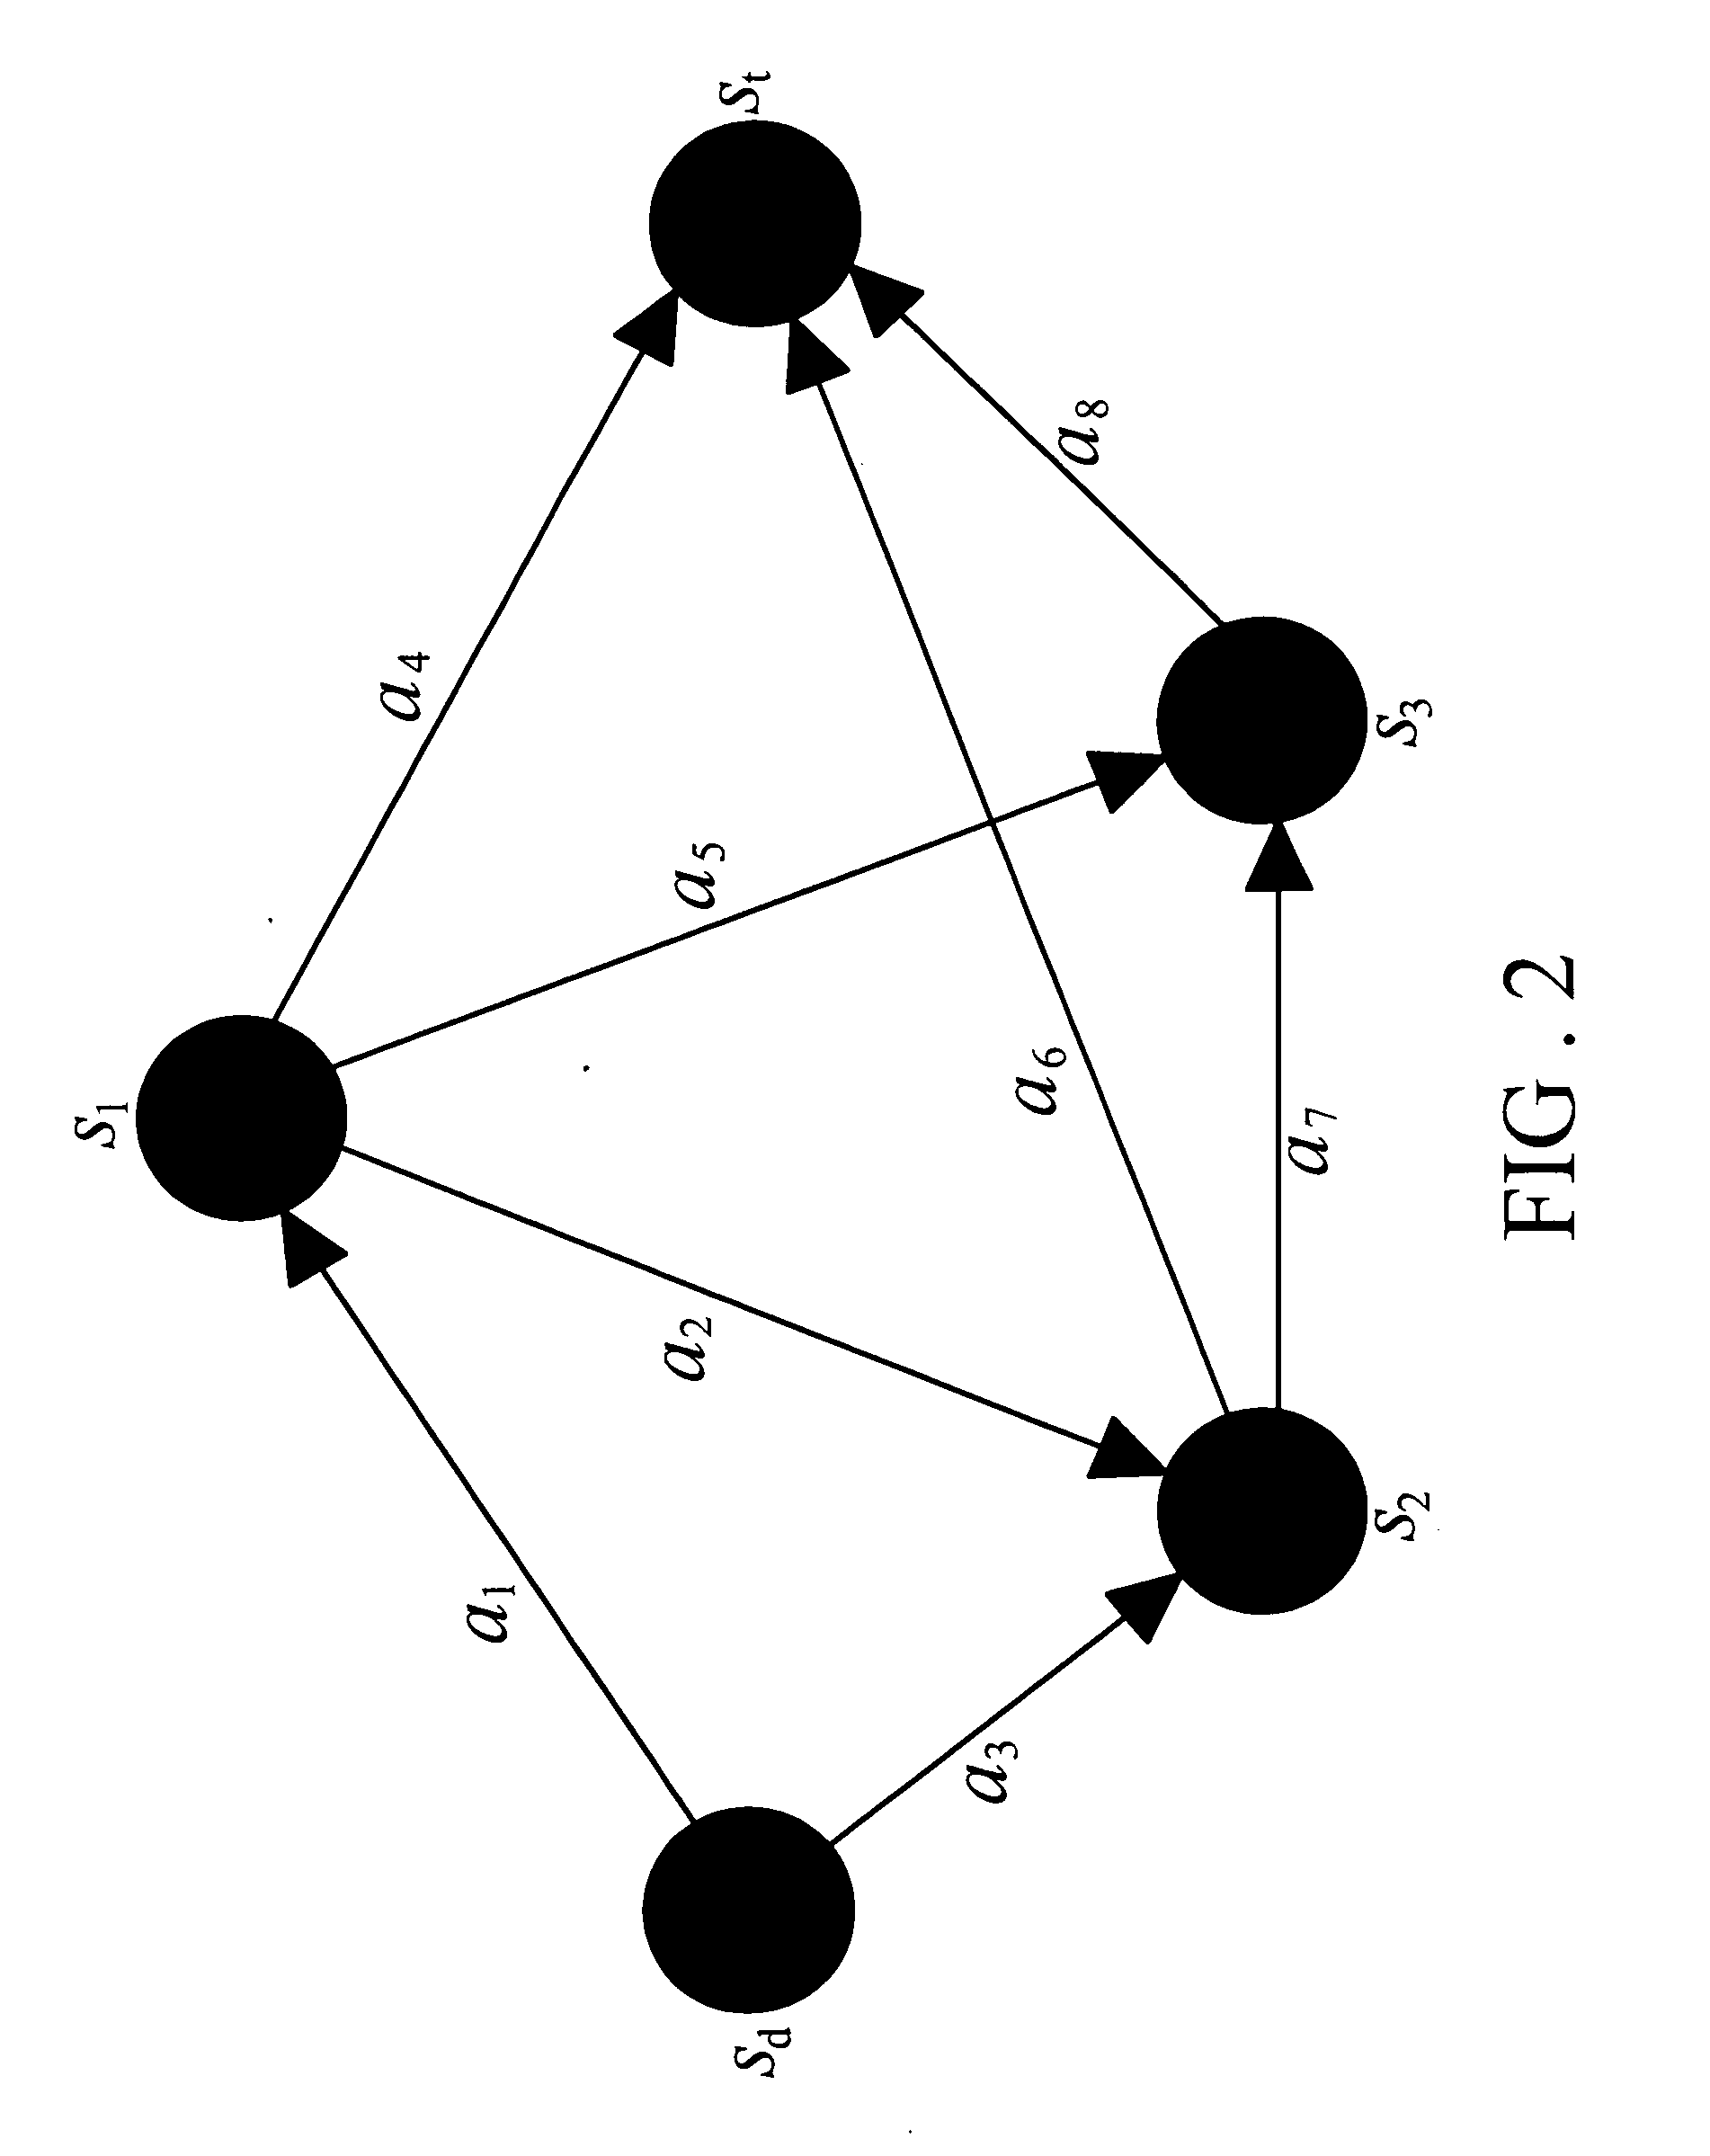 Accurate method to evaluate a system reliability of a cloud computing network